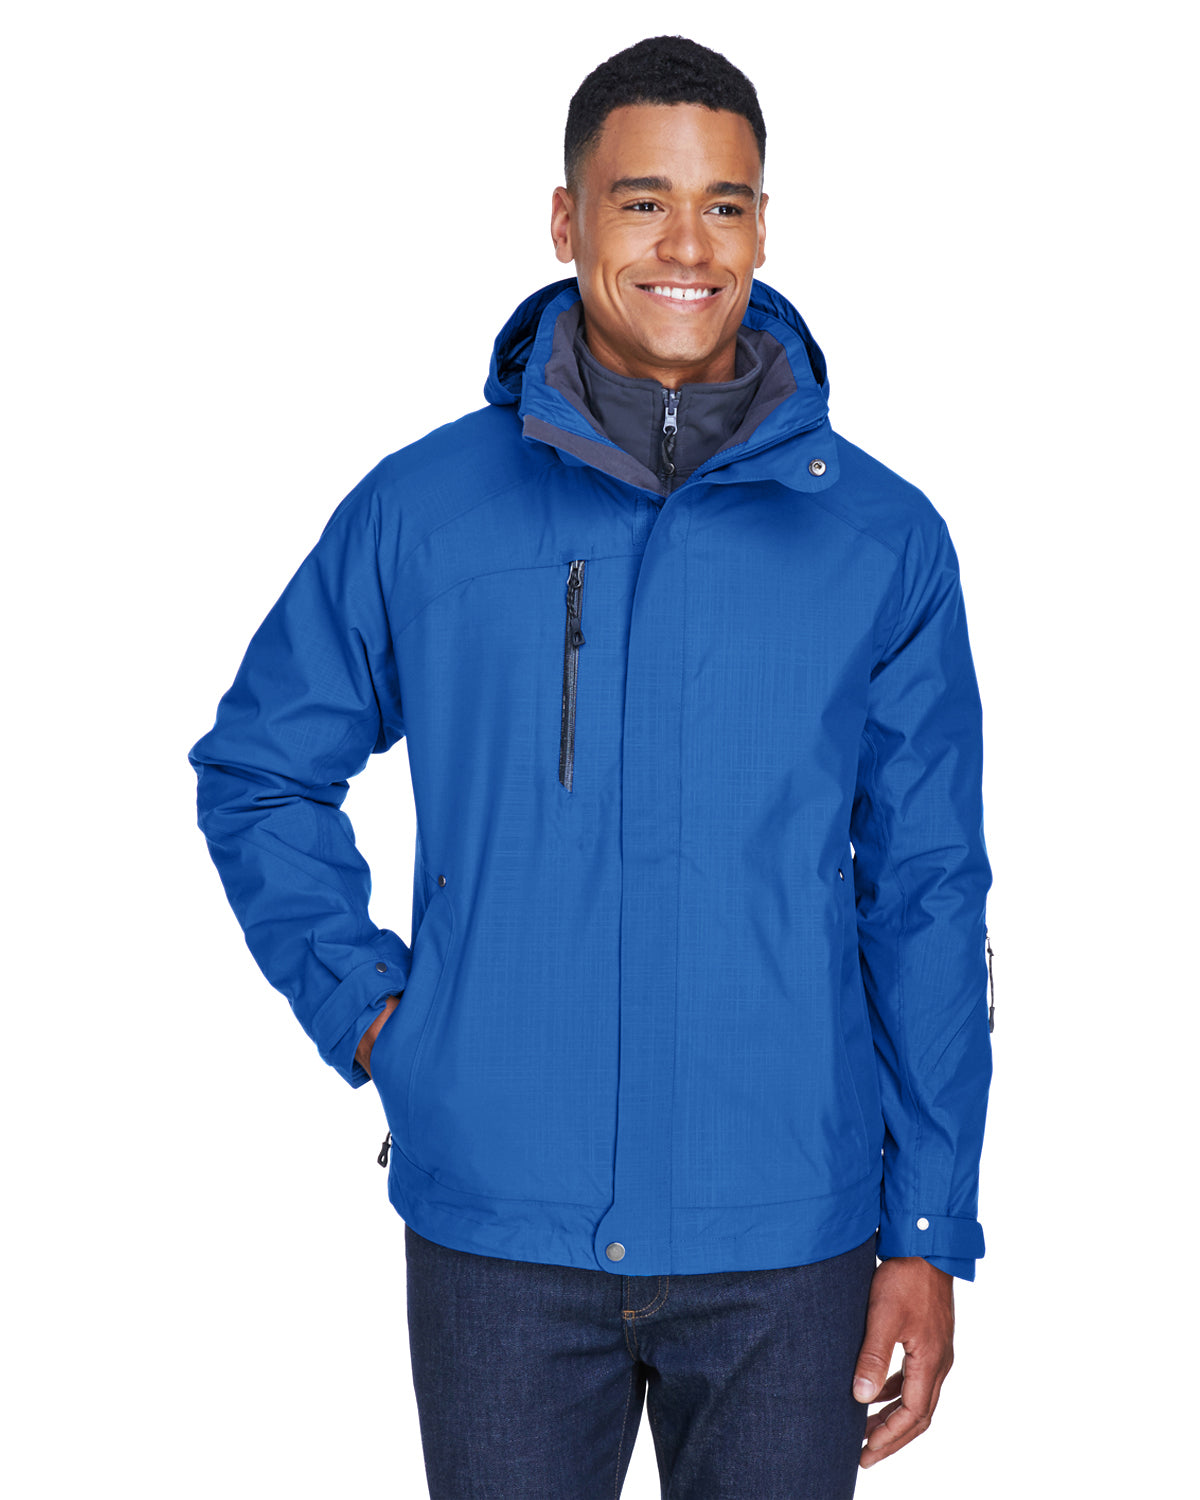 NORTH END MEN'S CAPRICE 3-IN-1 JACKET WITH SOFT SHELL LINER